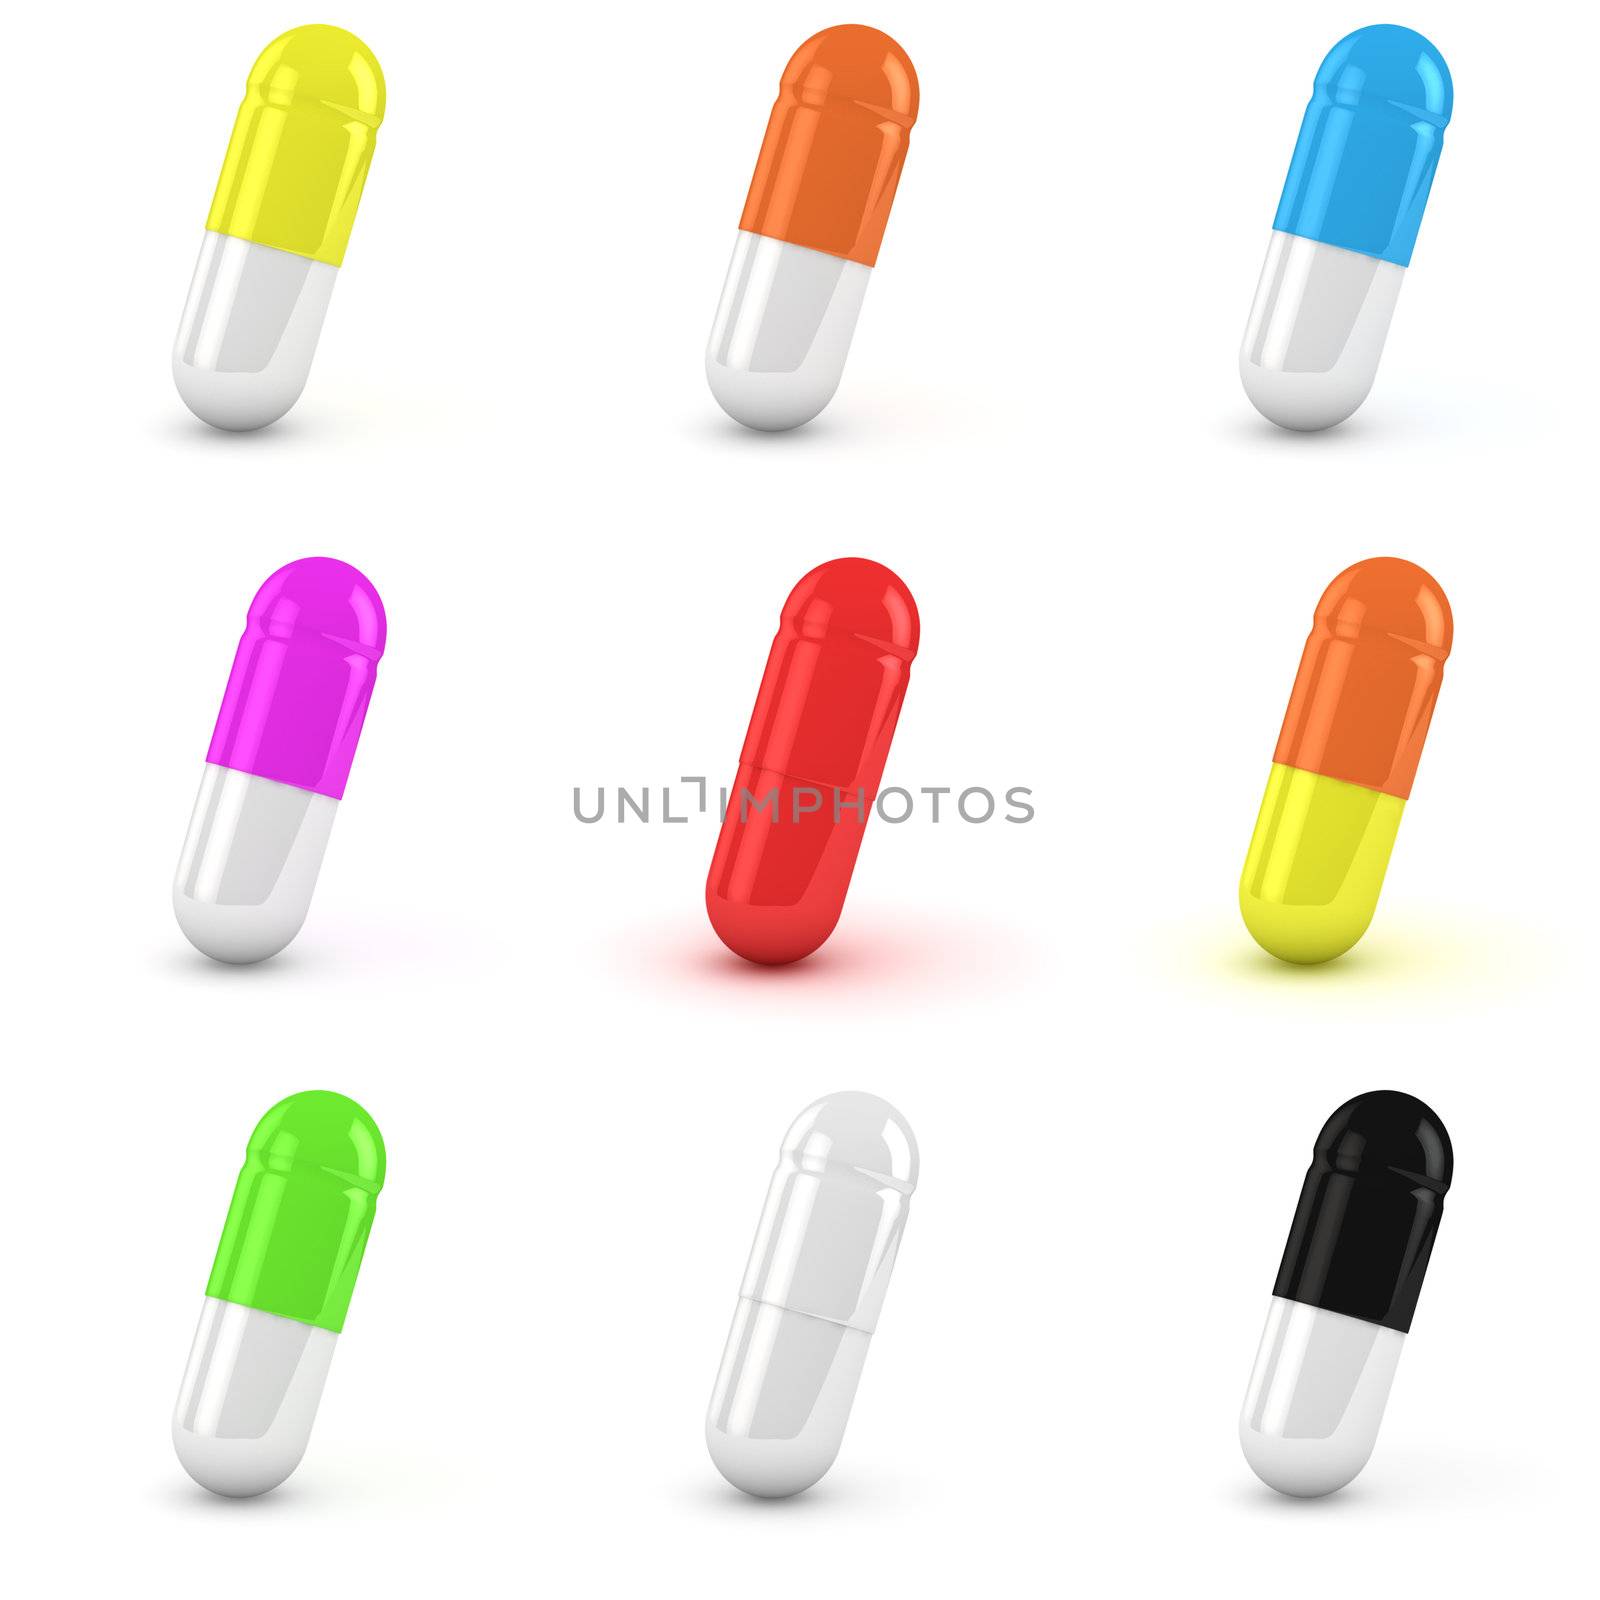 Drug capsules in a different colour variation